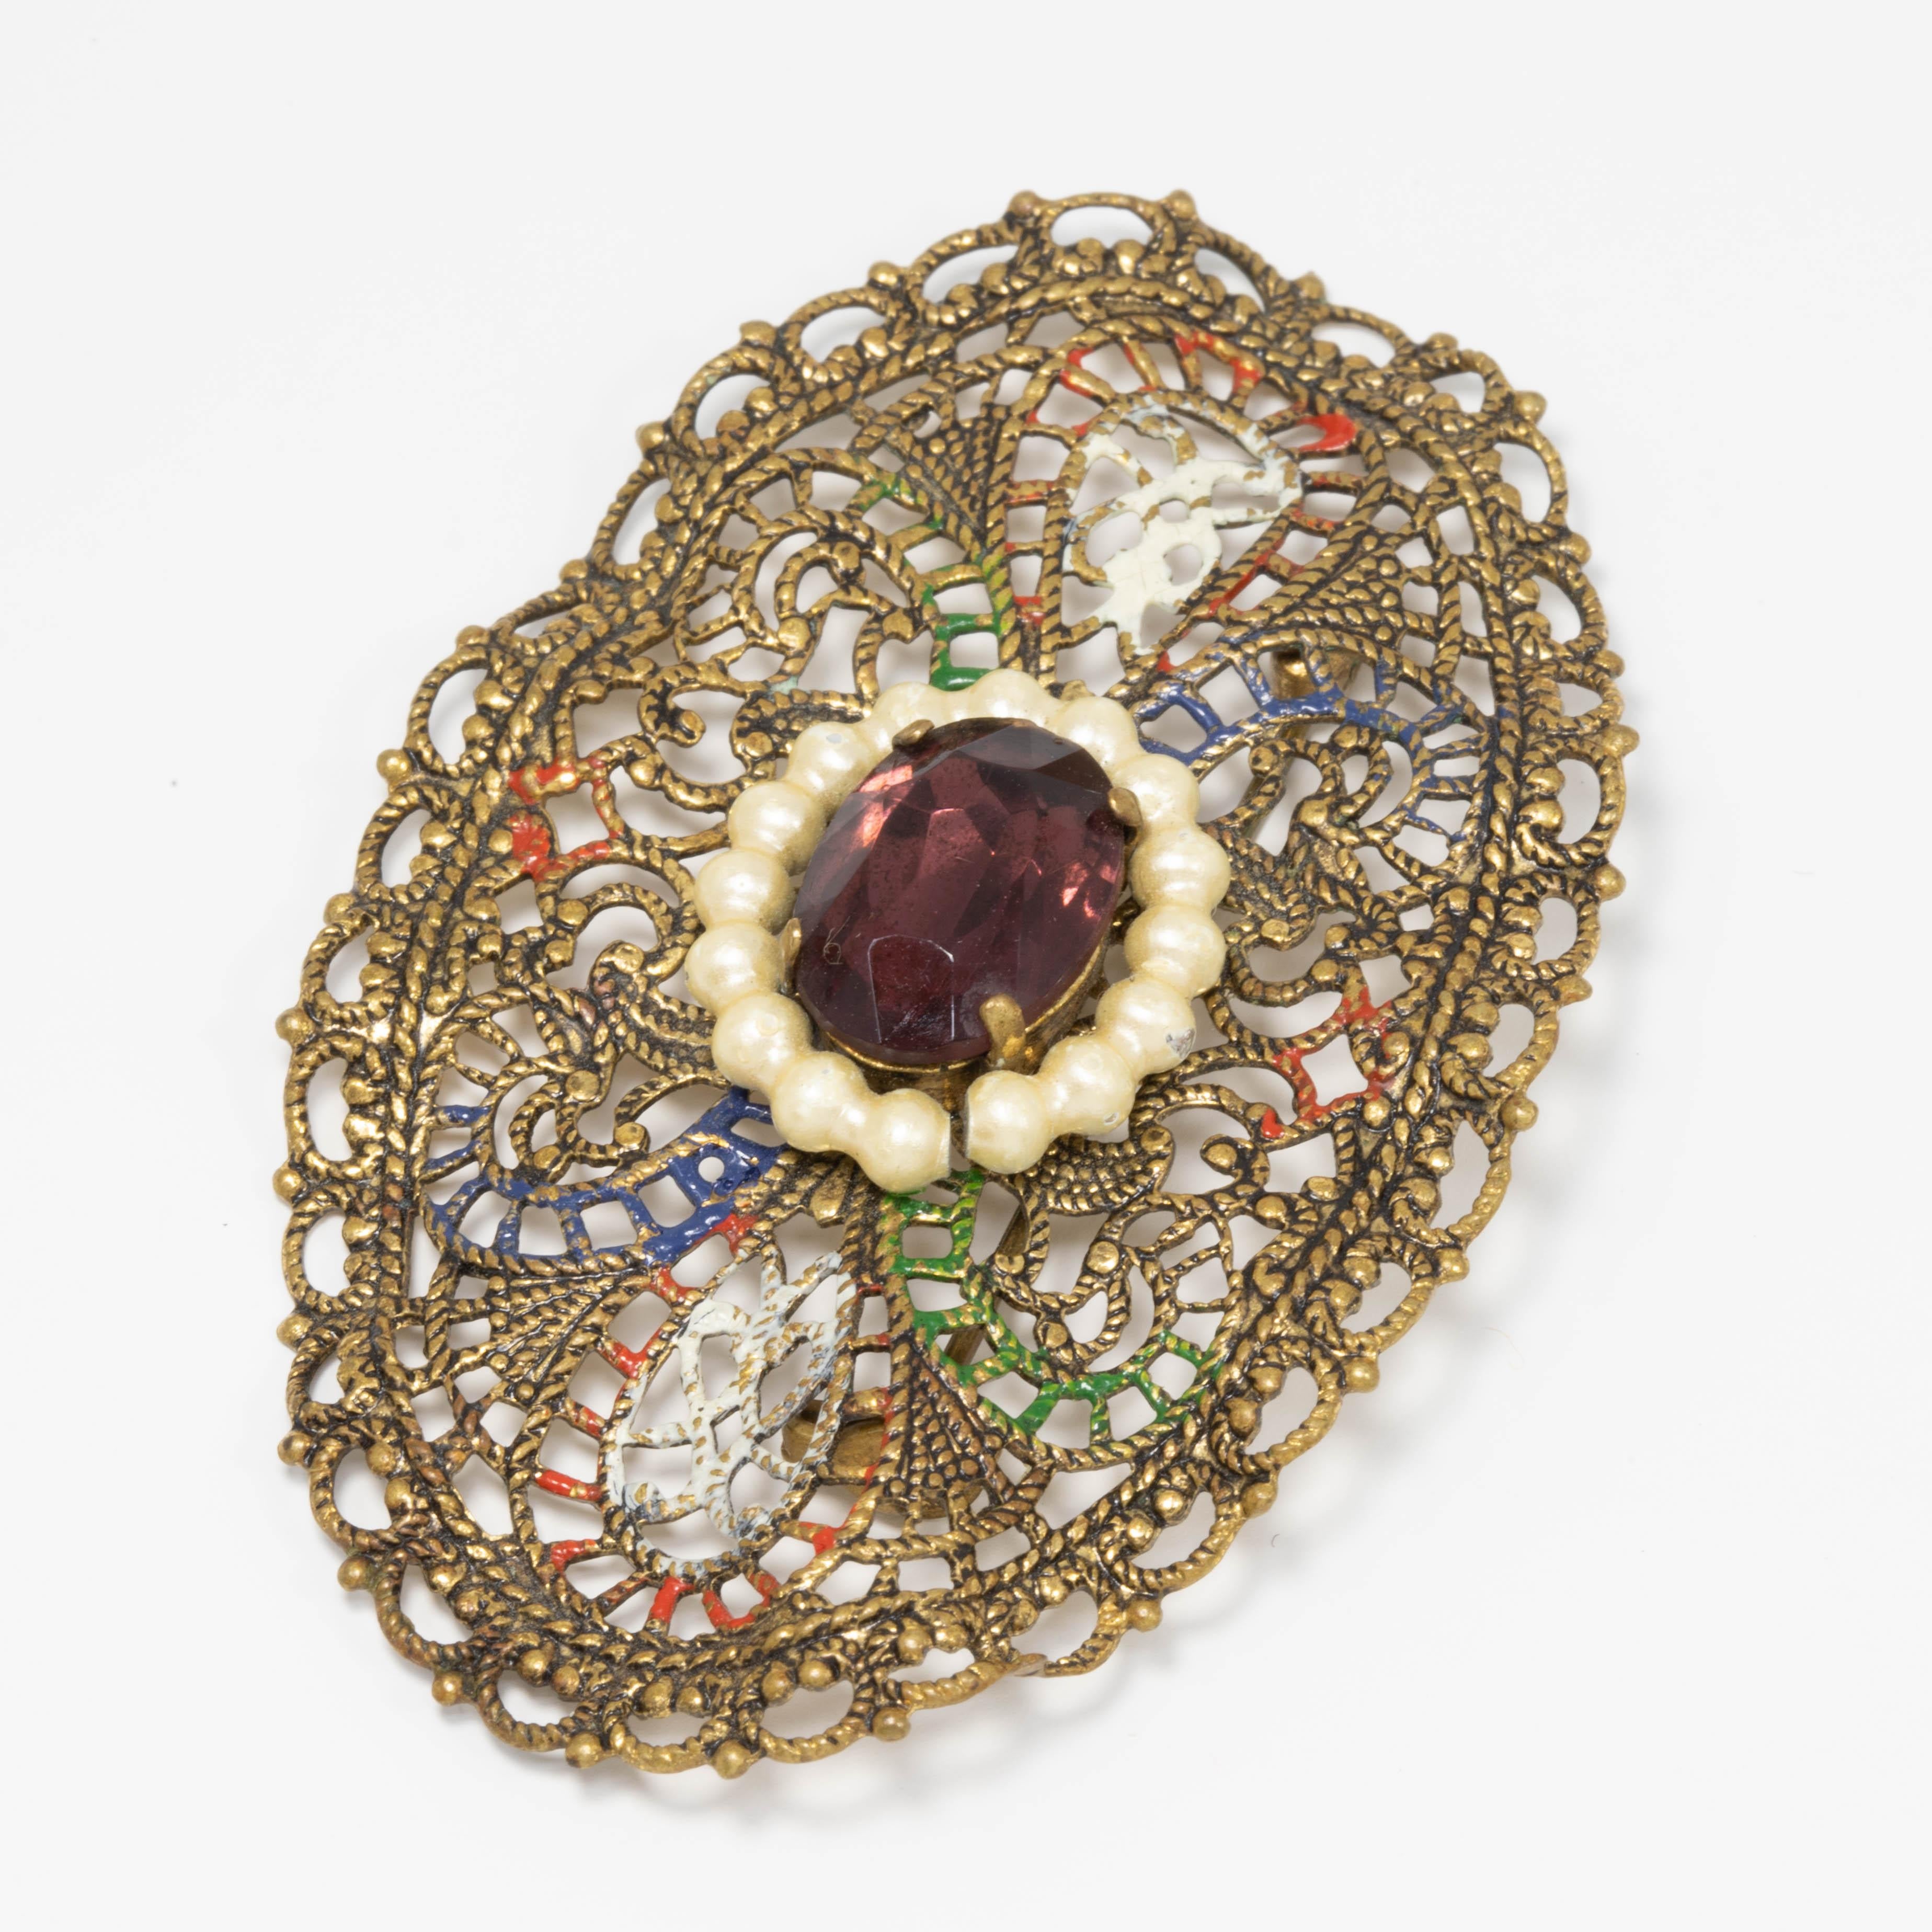 A stylish vintage German pin. Features a filigree brasstone metal setting with an amethyst crystal centerpiece, accented with faux pearls around. The setting is painted with white, orange, blue, and green enamel.

Vintage, circa mid 1900s. Made in